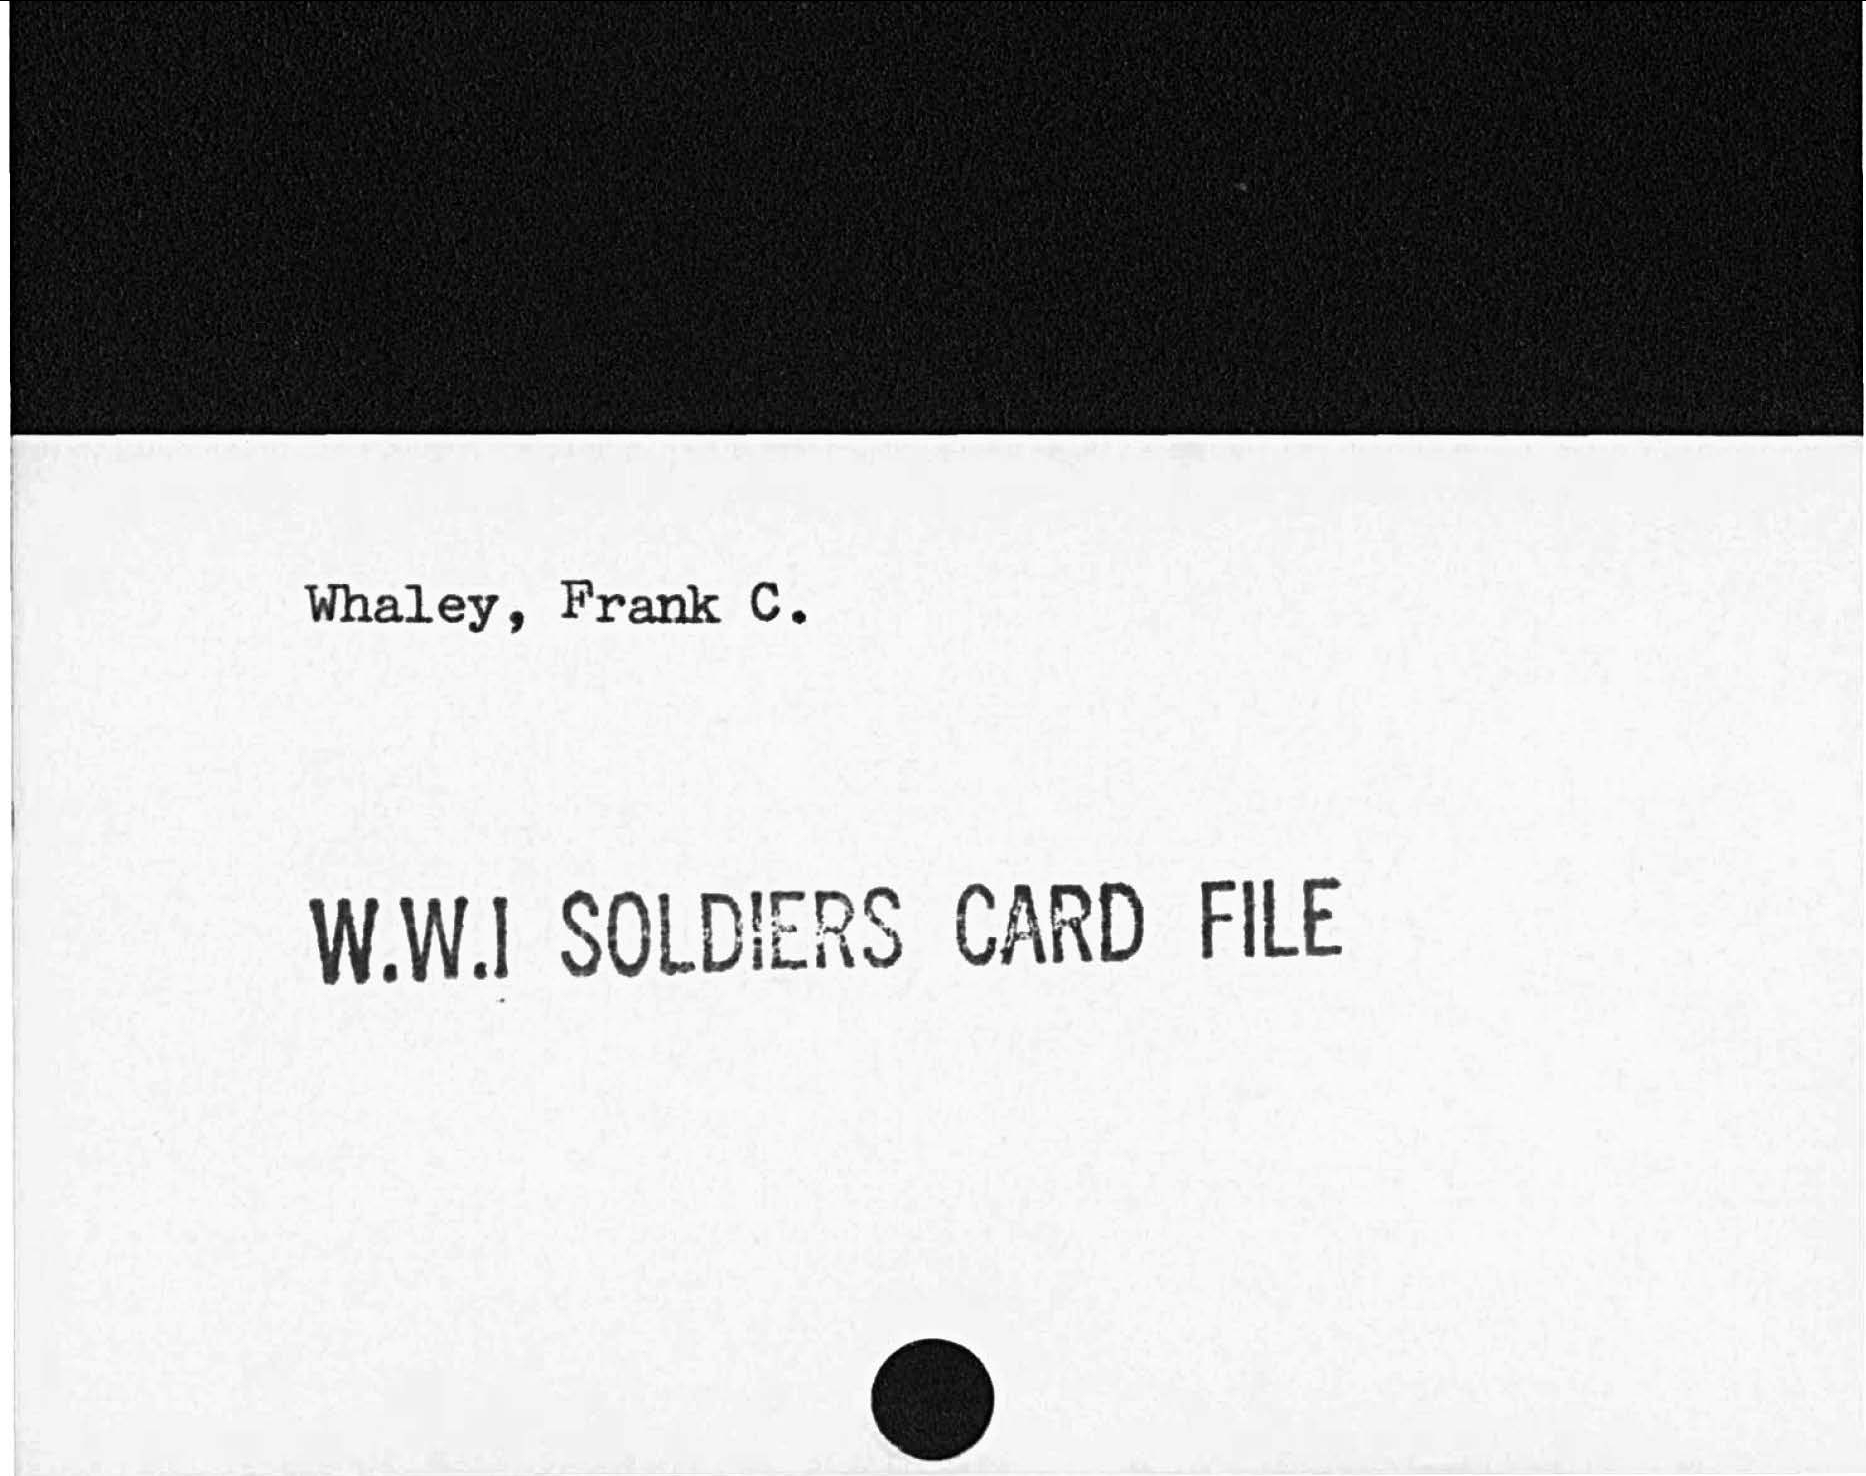 Whaley, Frank C.W. W. I SOLDIERS CARD FILED